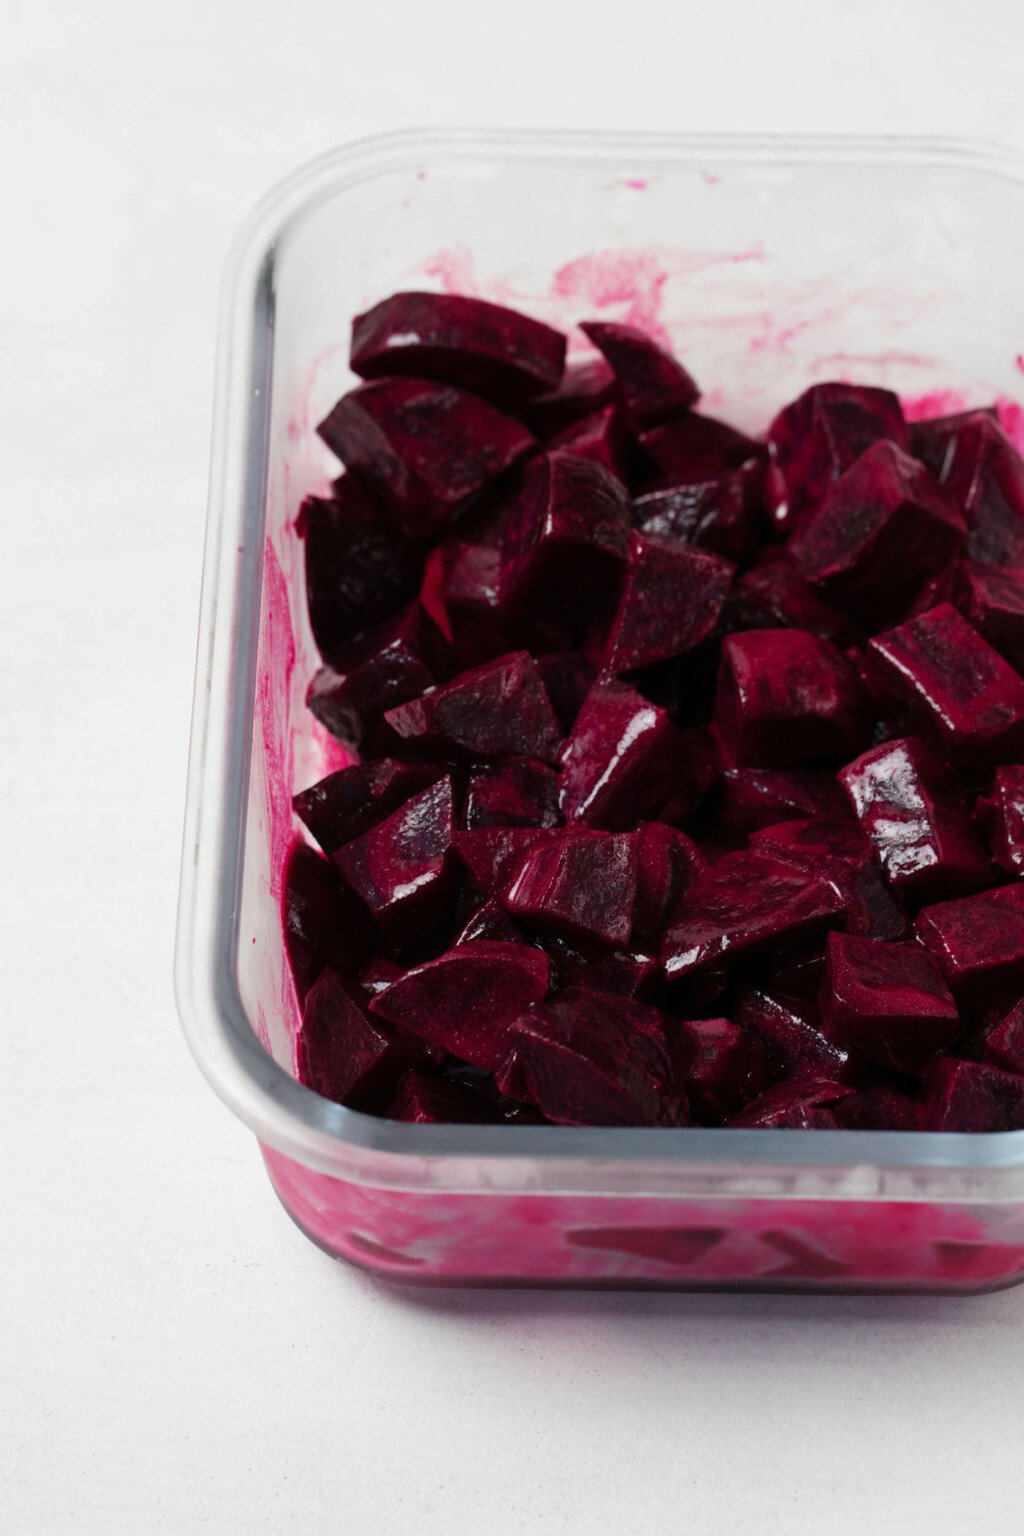 Deep crimson, marinated beets have been topped with a simple vinaigrette.